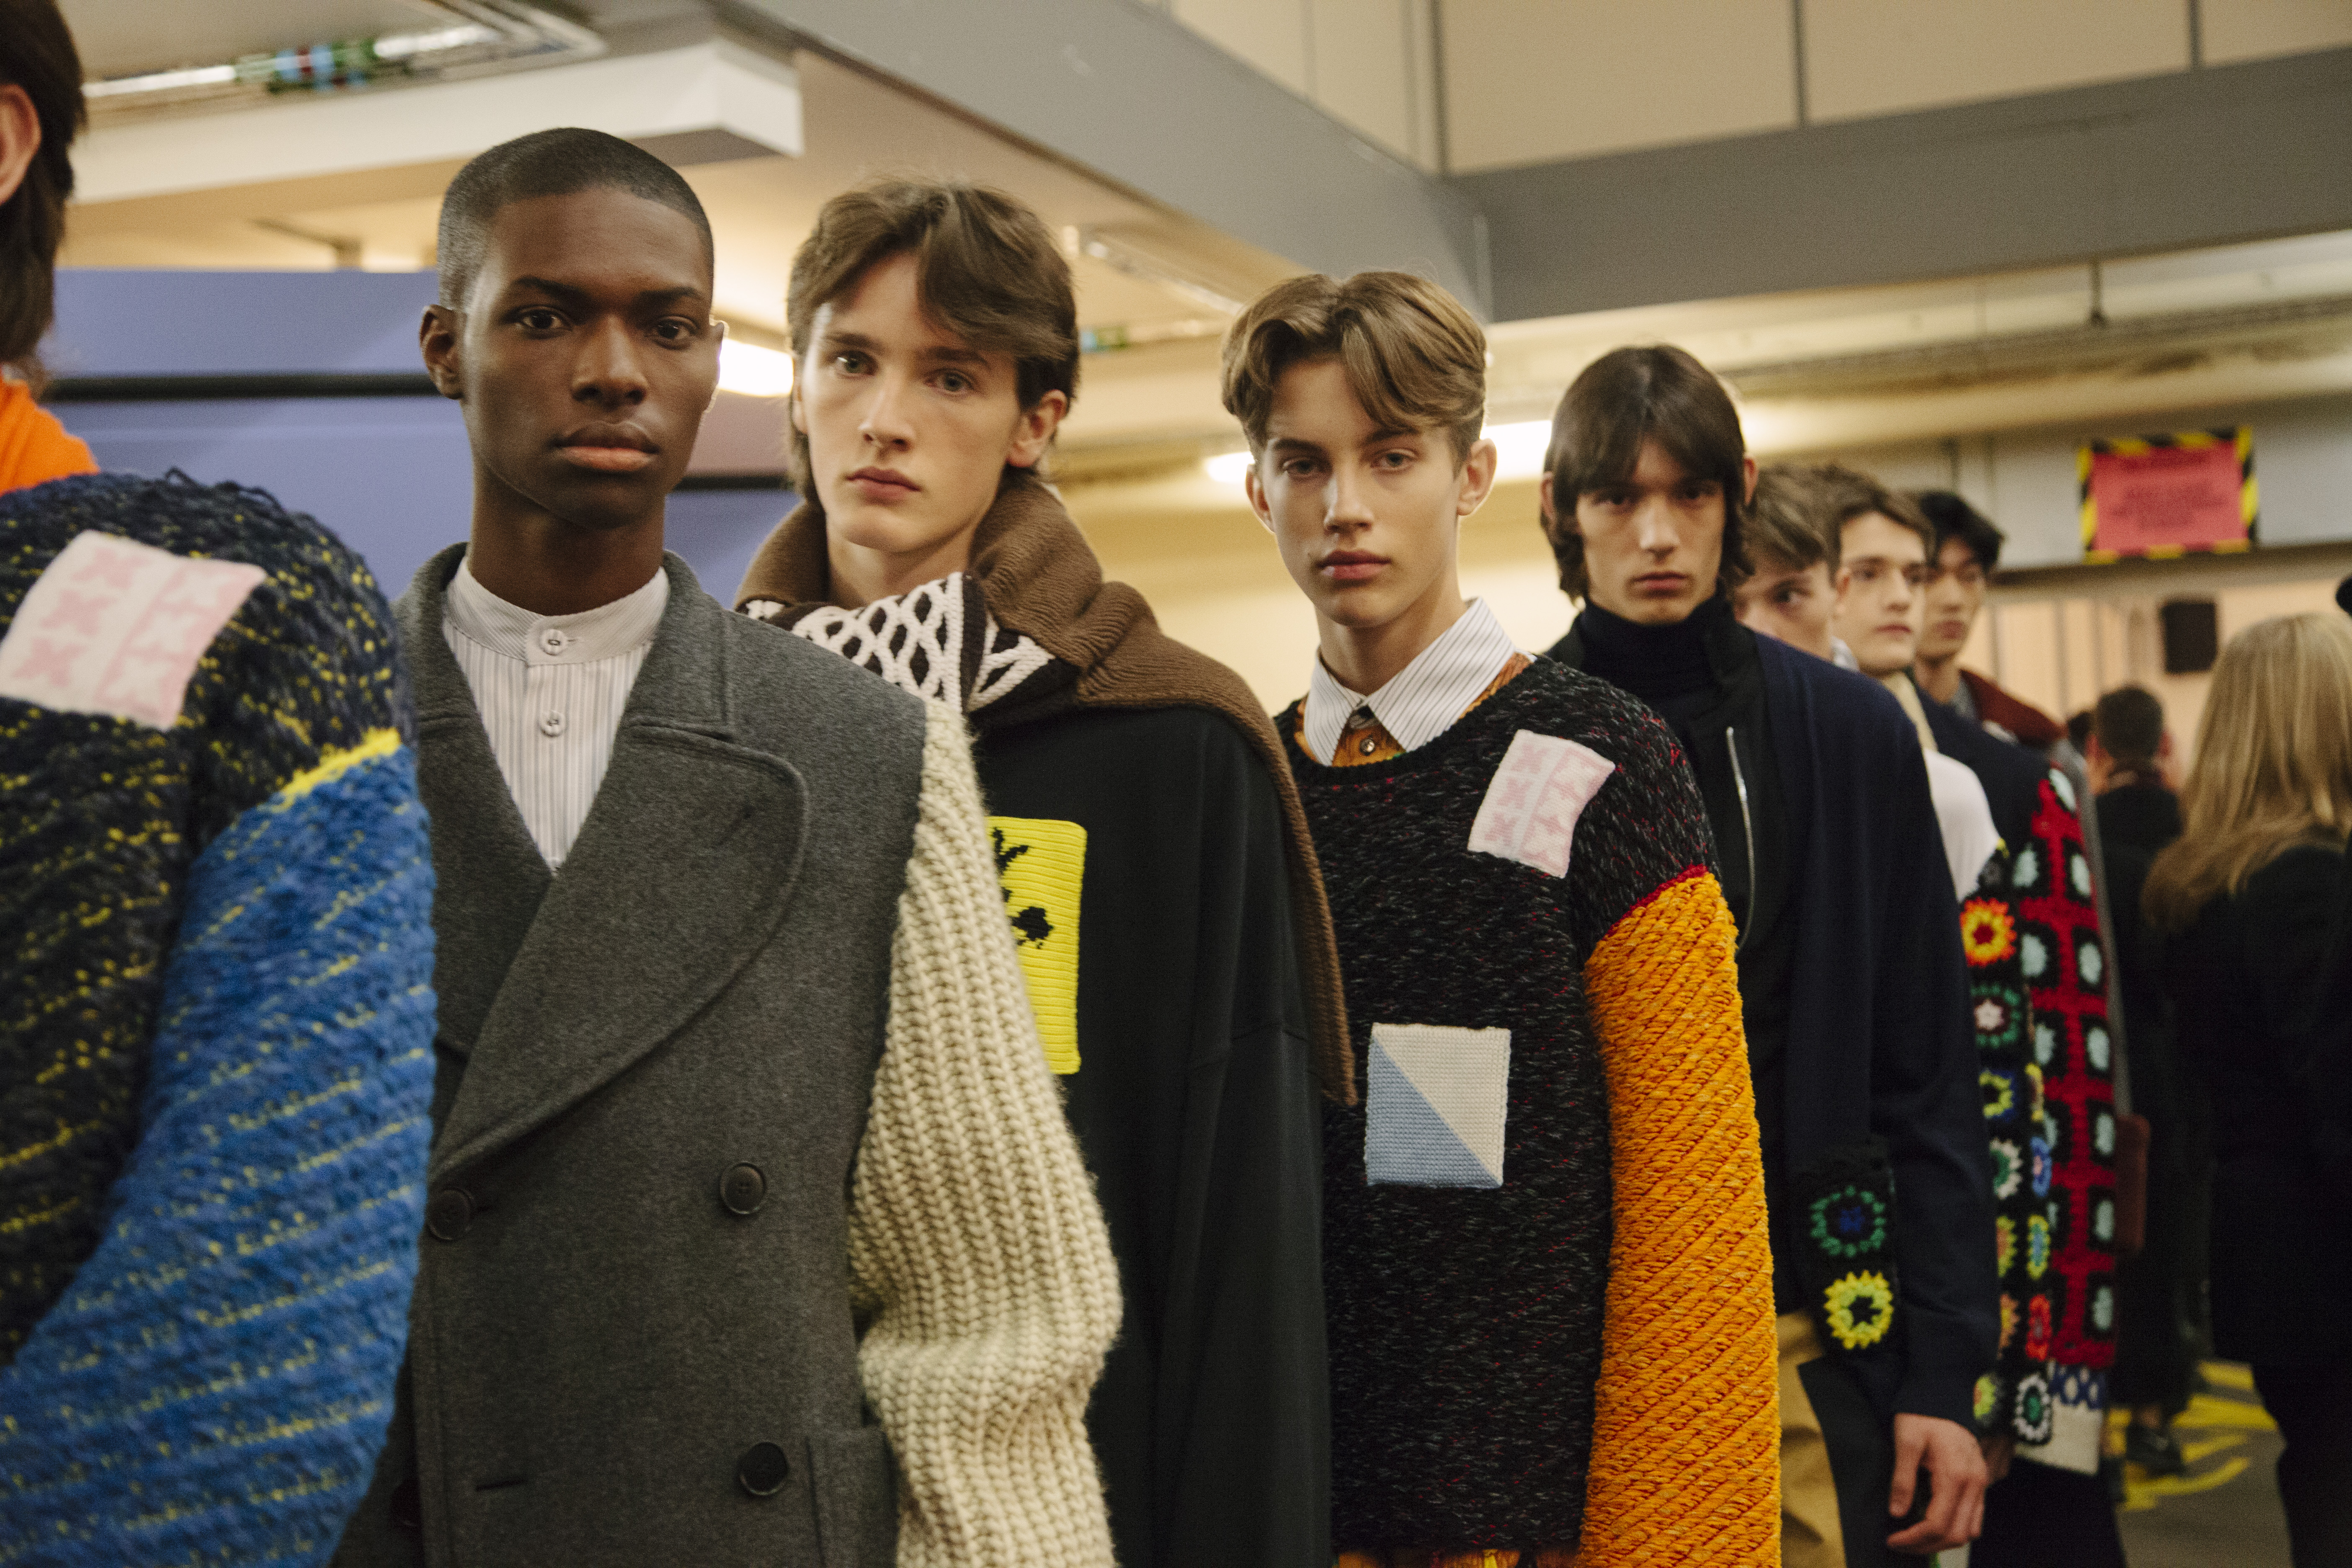 J.W.ANDERSON MEN’S FALL WINTER 2017/18 COLLECTION LONDON